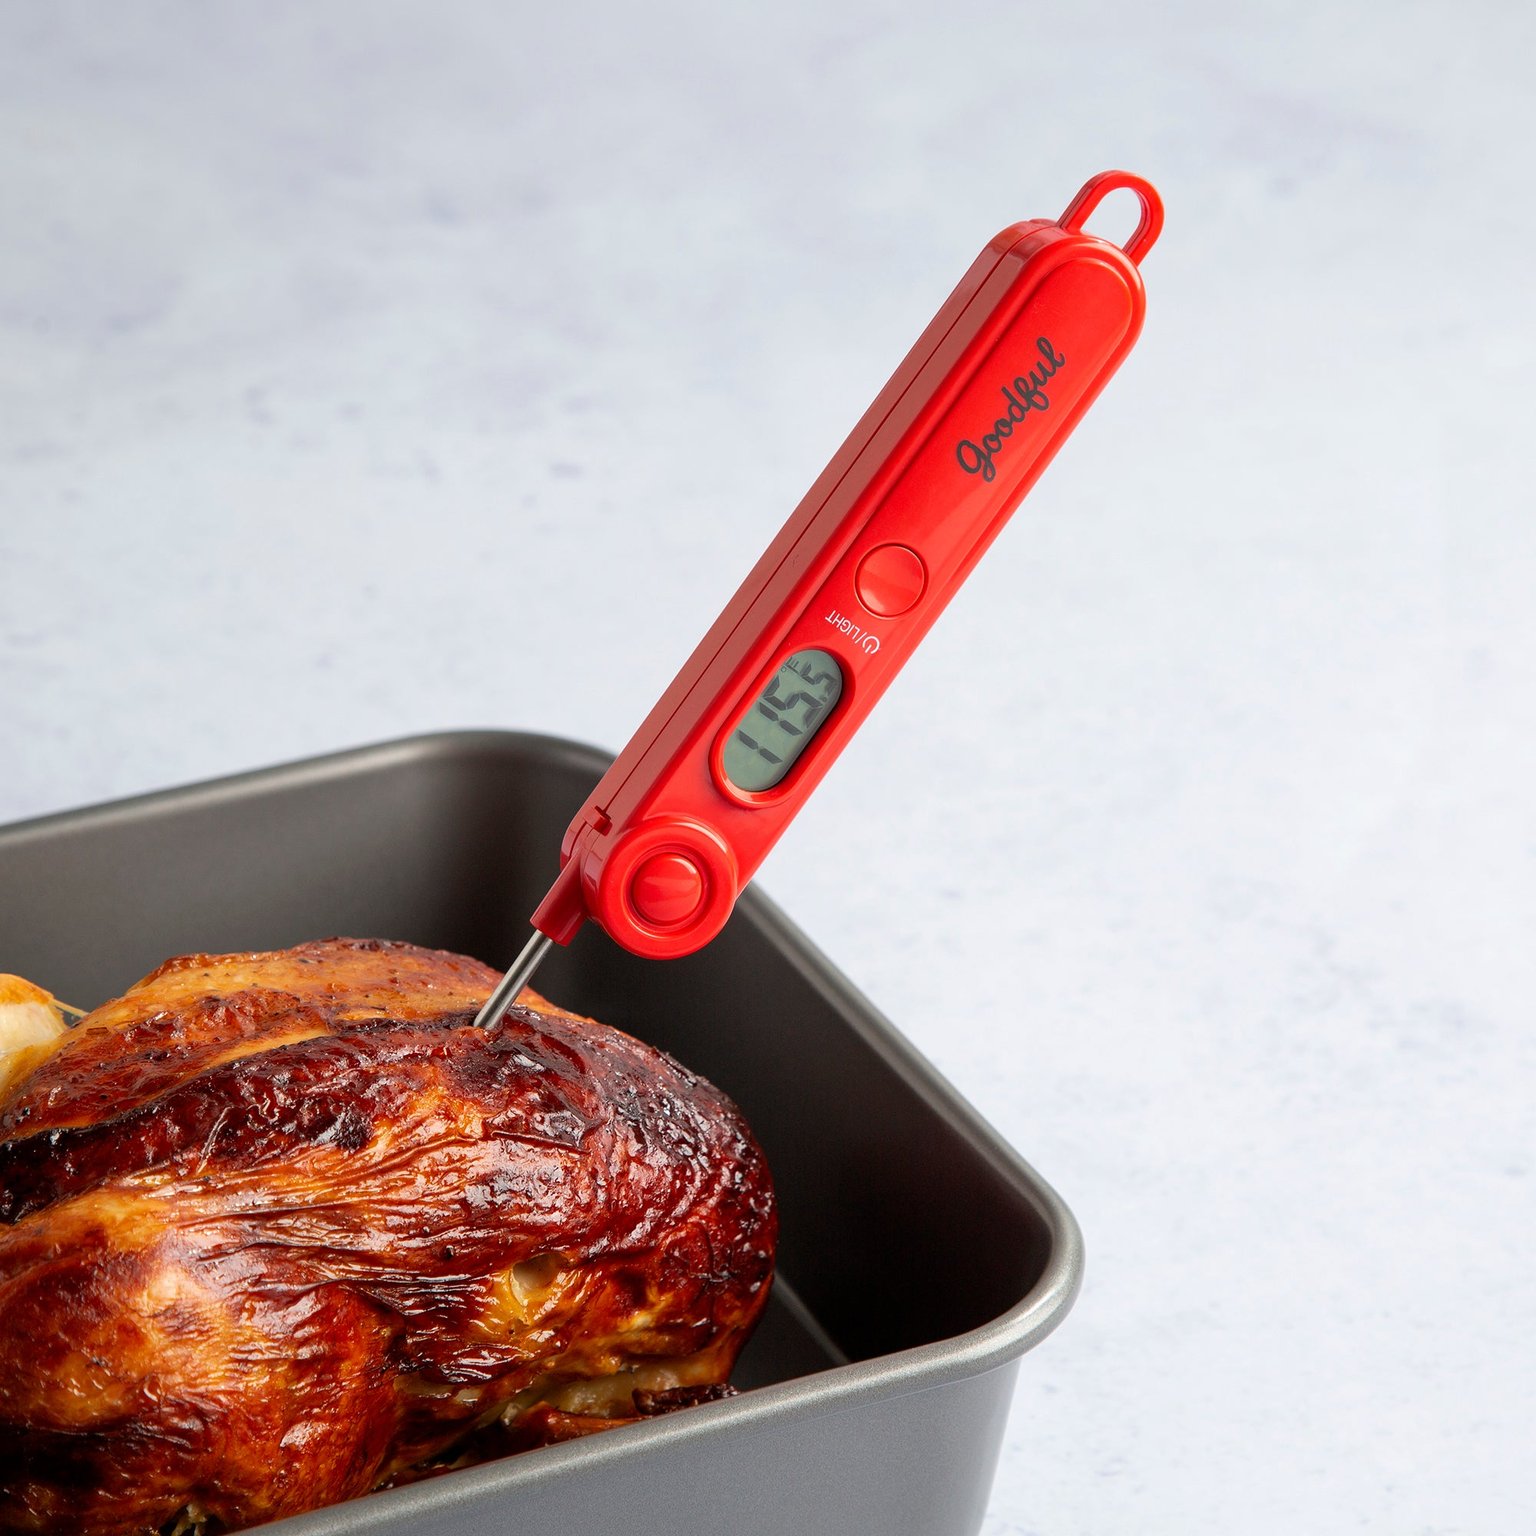 https://assets.verishop.com/goodful-kitchen-goodful-digital-instant-read-handheld-thermometer-accurate-read-folding-probe-and-magnet-back-fahrenheit-or-celsius-one-aaa-battery-included-red/M00741393580471-3365717672?auto=format&cs=strip&fit=max&w=768&dpr=2